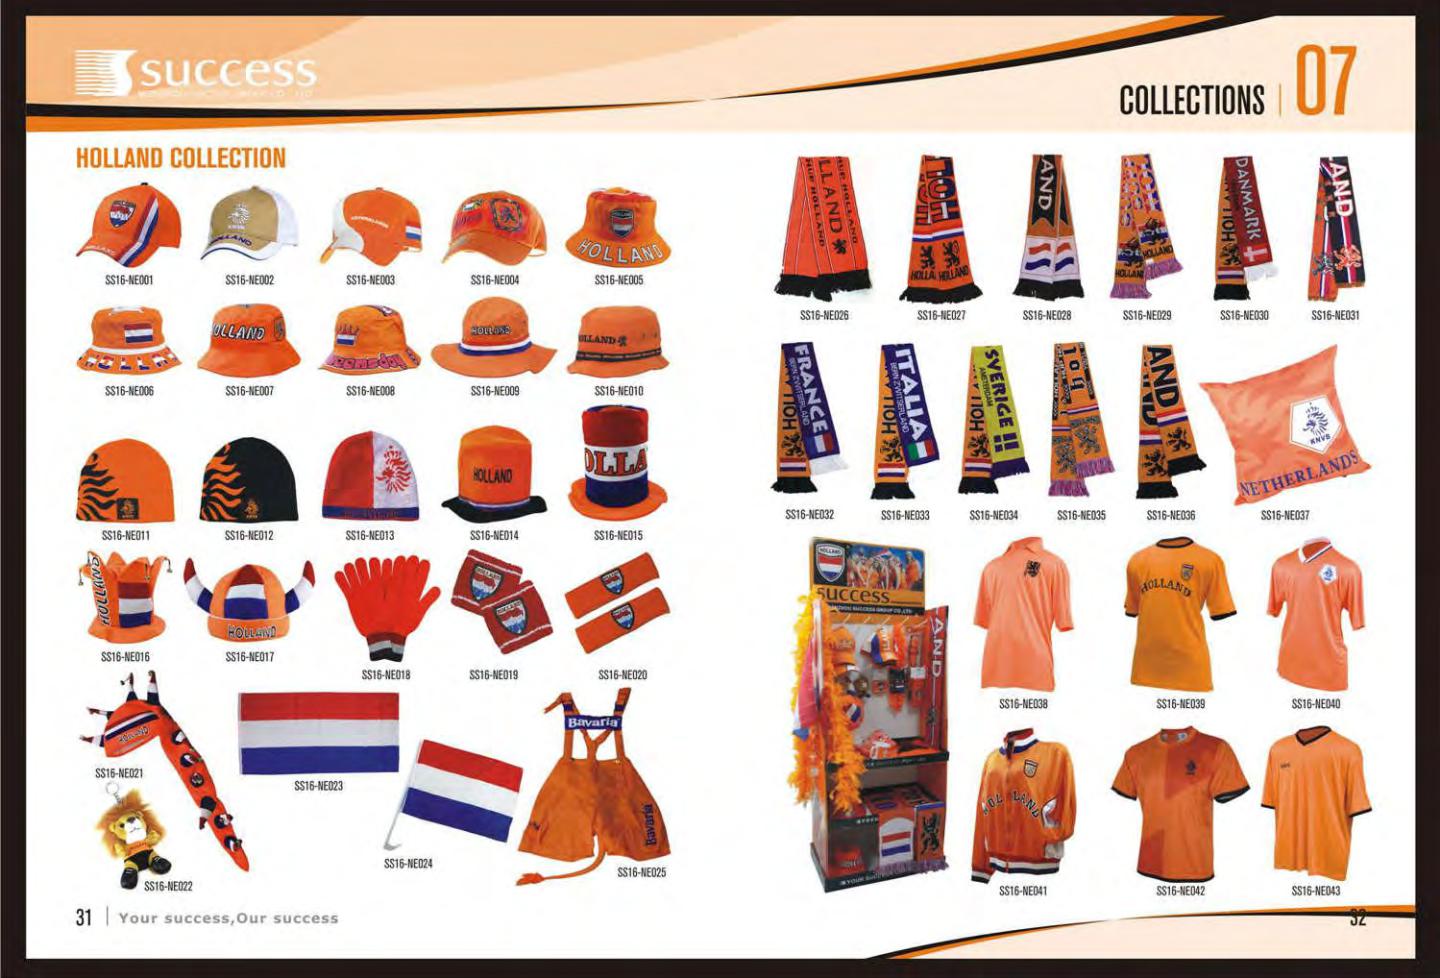 Wholesale Netherland football fans' products